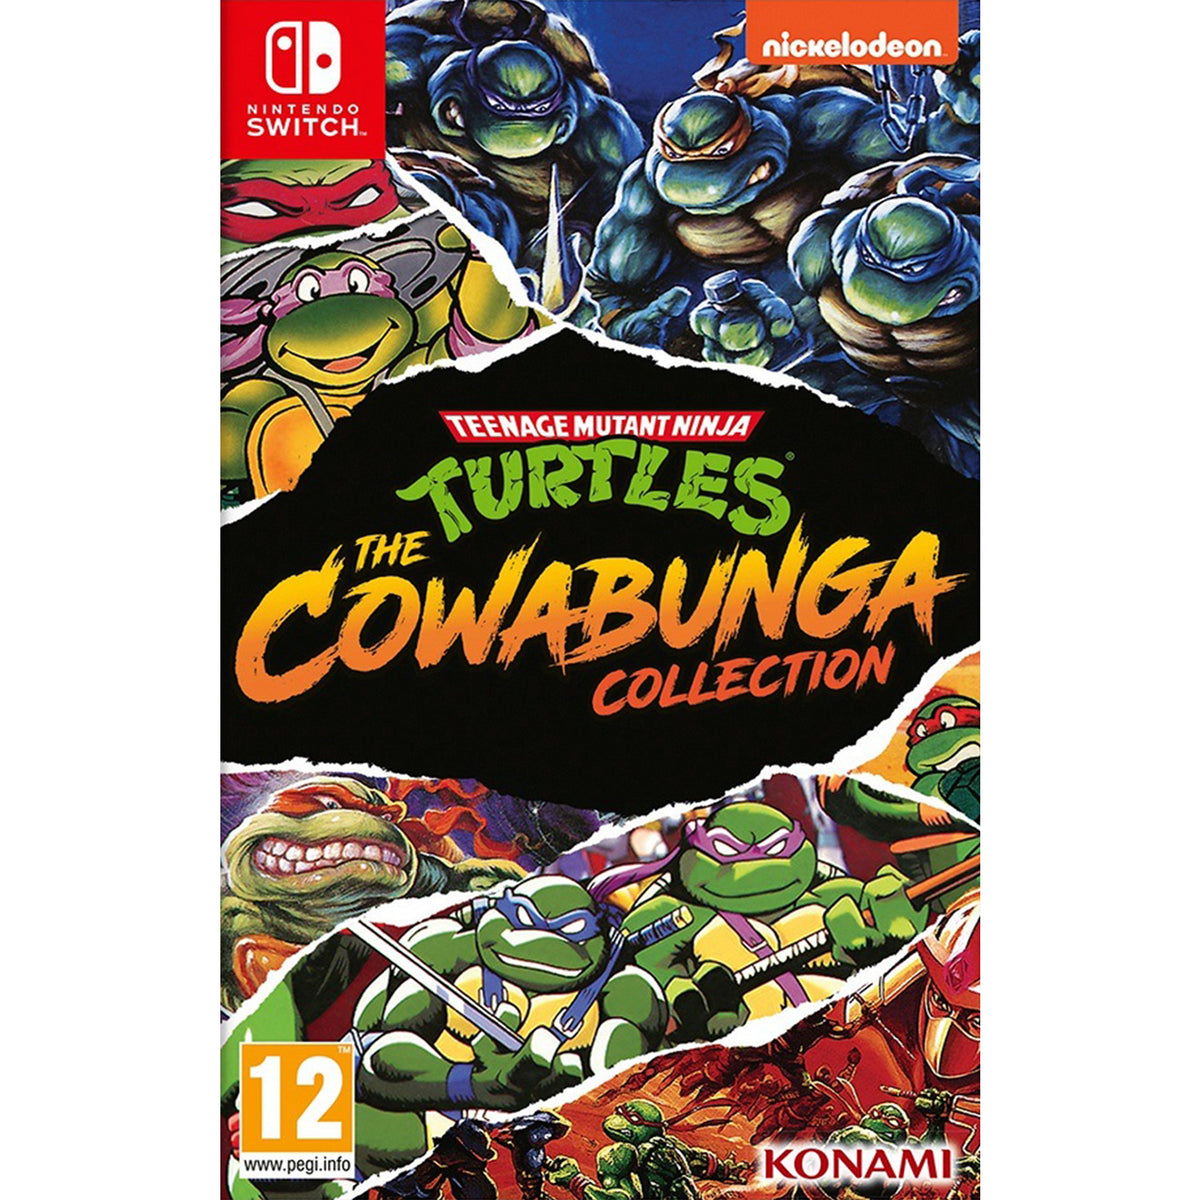 Teenage Mutant Ninja Day! Entertainment – - Cowabunga Switch Of The Go\'s Turtles: Collection Deal The